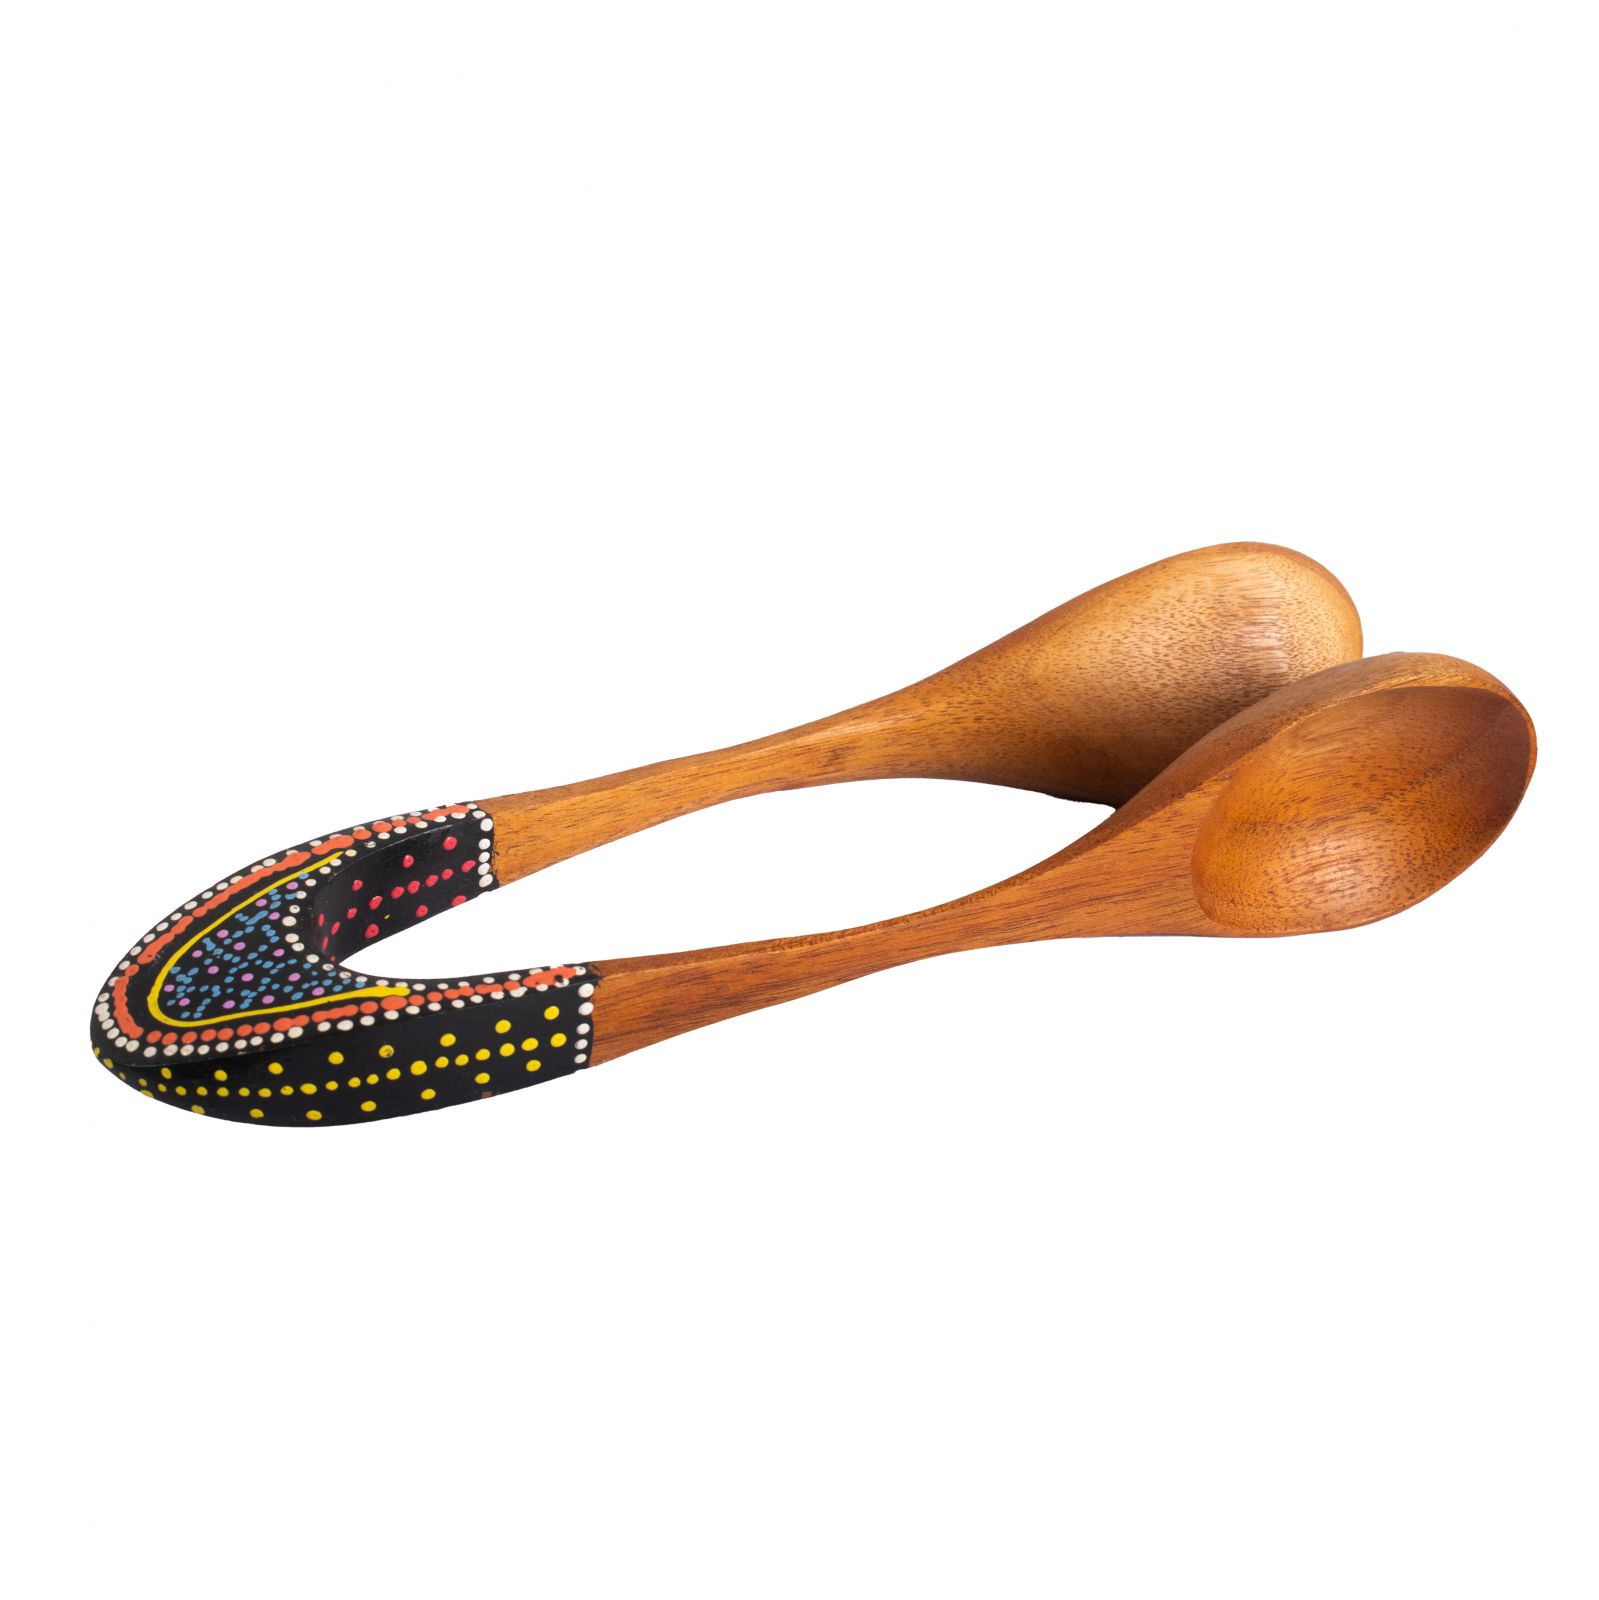 Painted wooden castanets Spoons Indonesia